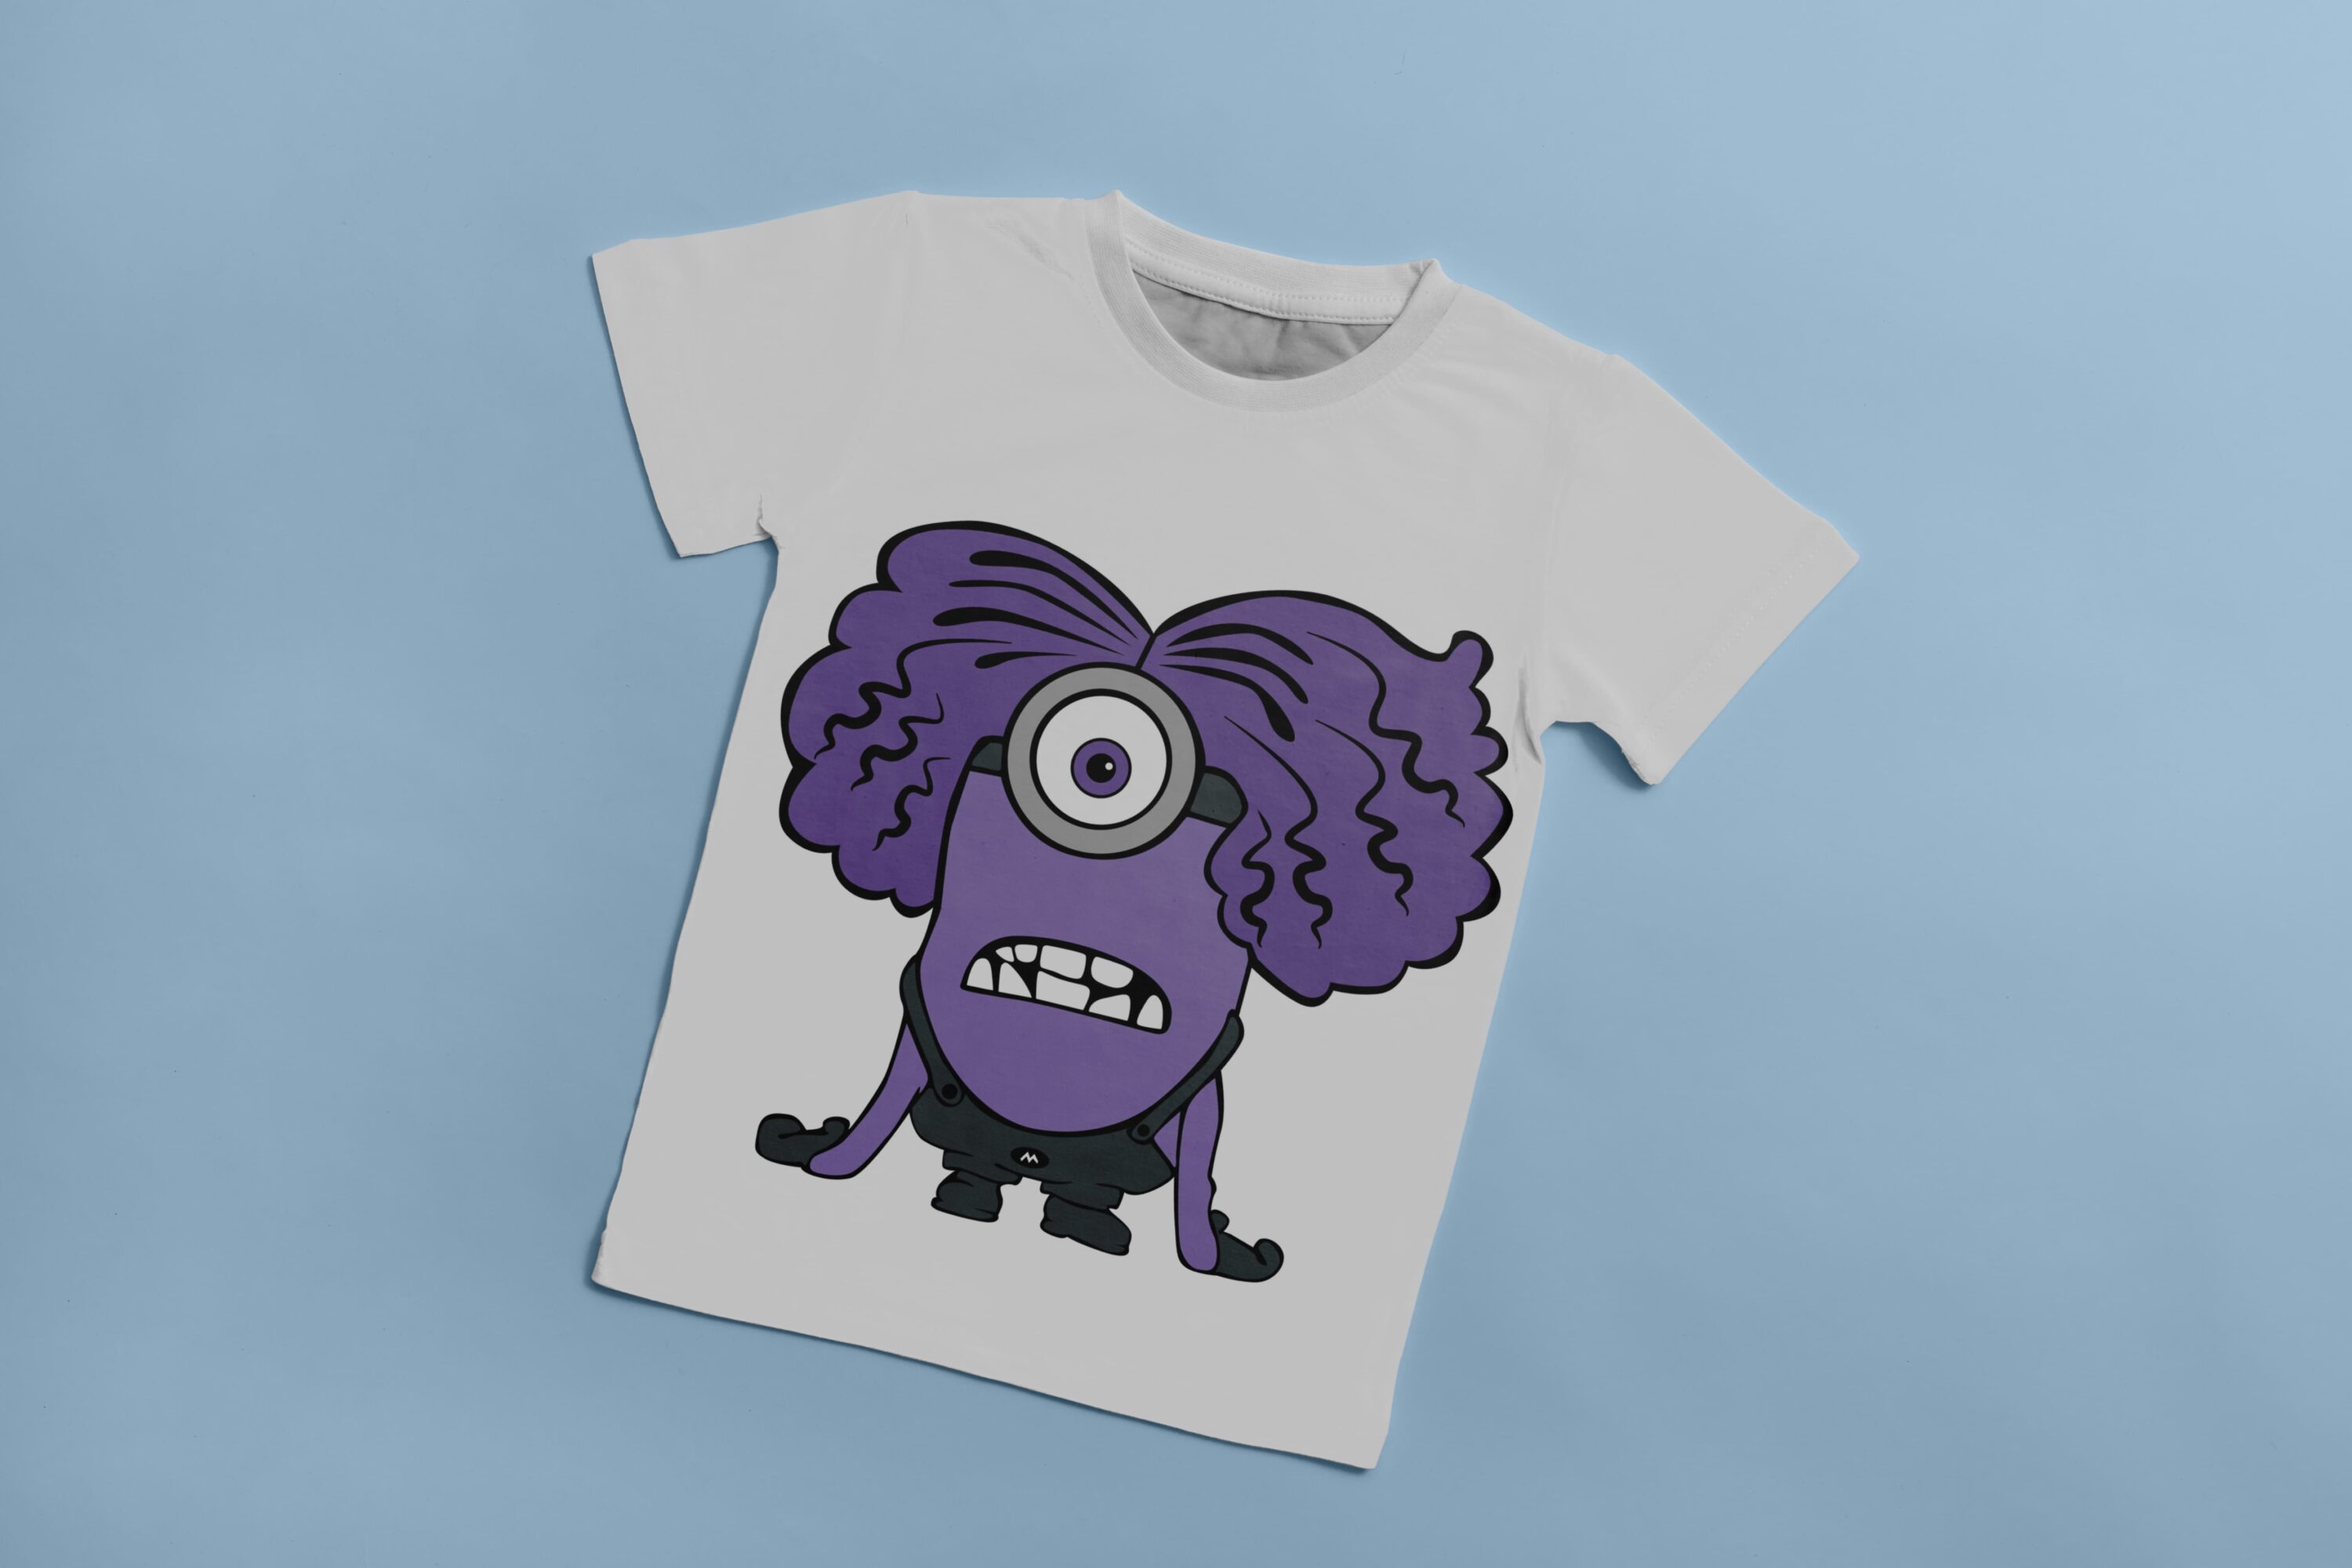 White T-shirt with an image of a surprised character - Evil Minion.